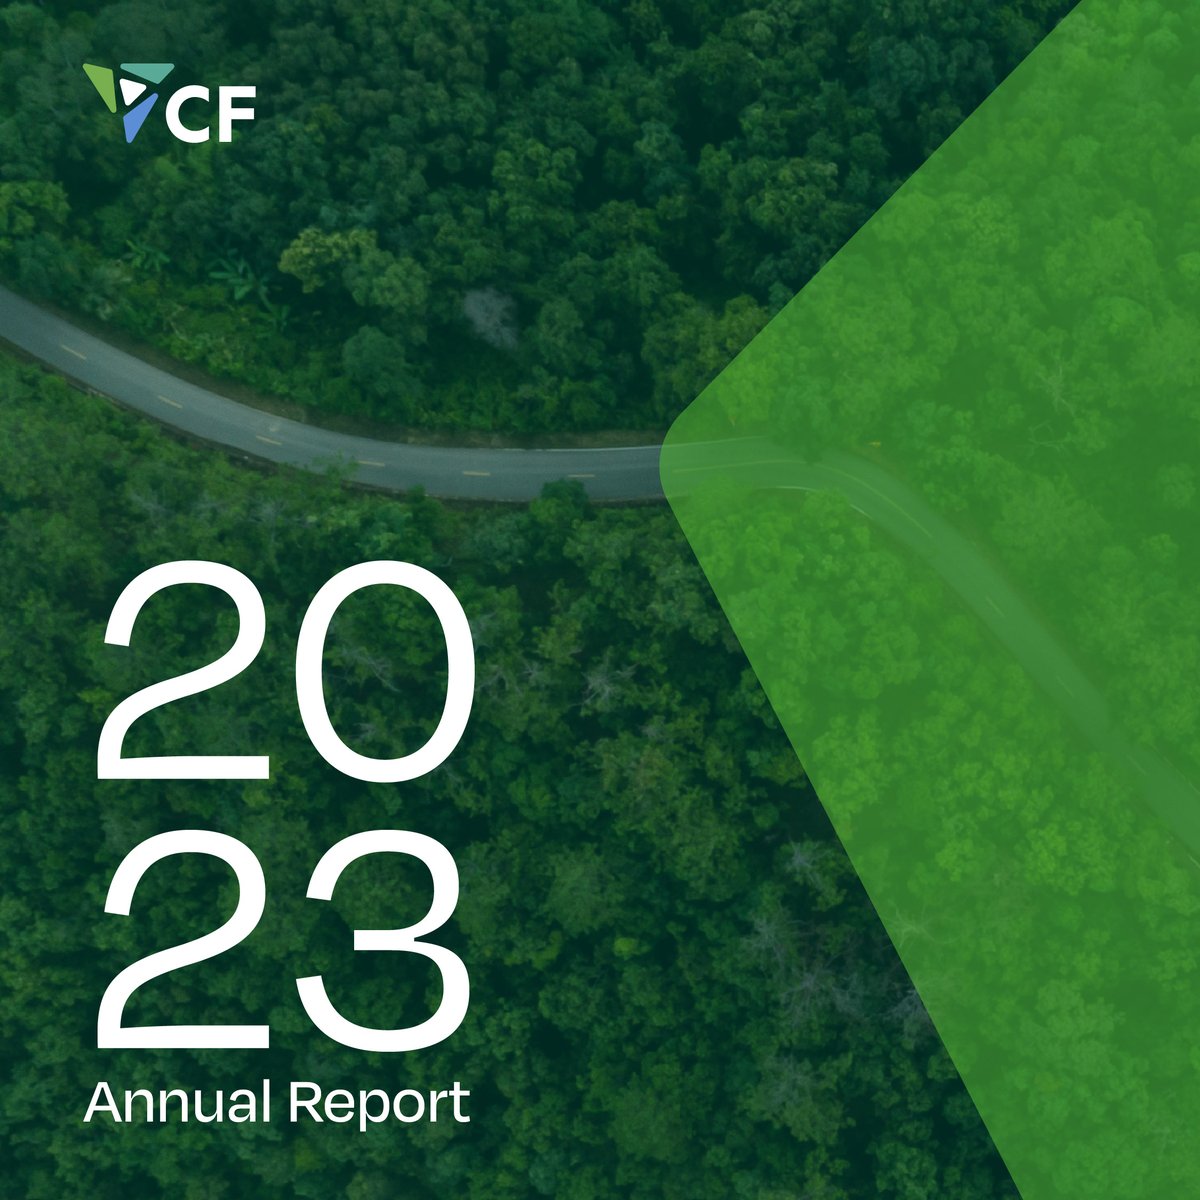 We’re pleased to release our 2023 Annual Report, which serves as a review of our business and operations, including our financial performance, strategy, and progress on our decarbonization and clean energy initiatives. Details here: bit.ly/3VqlOsb.